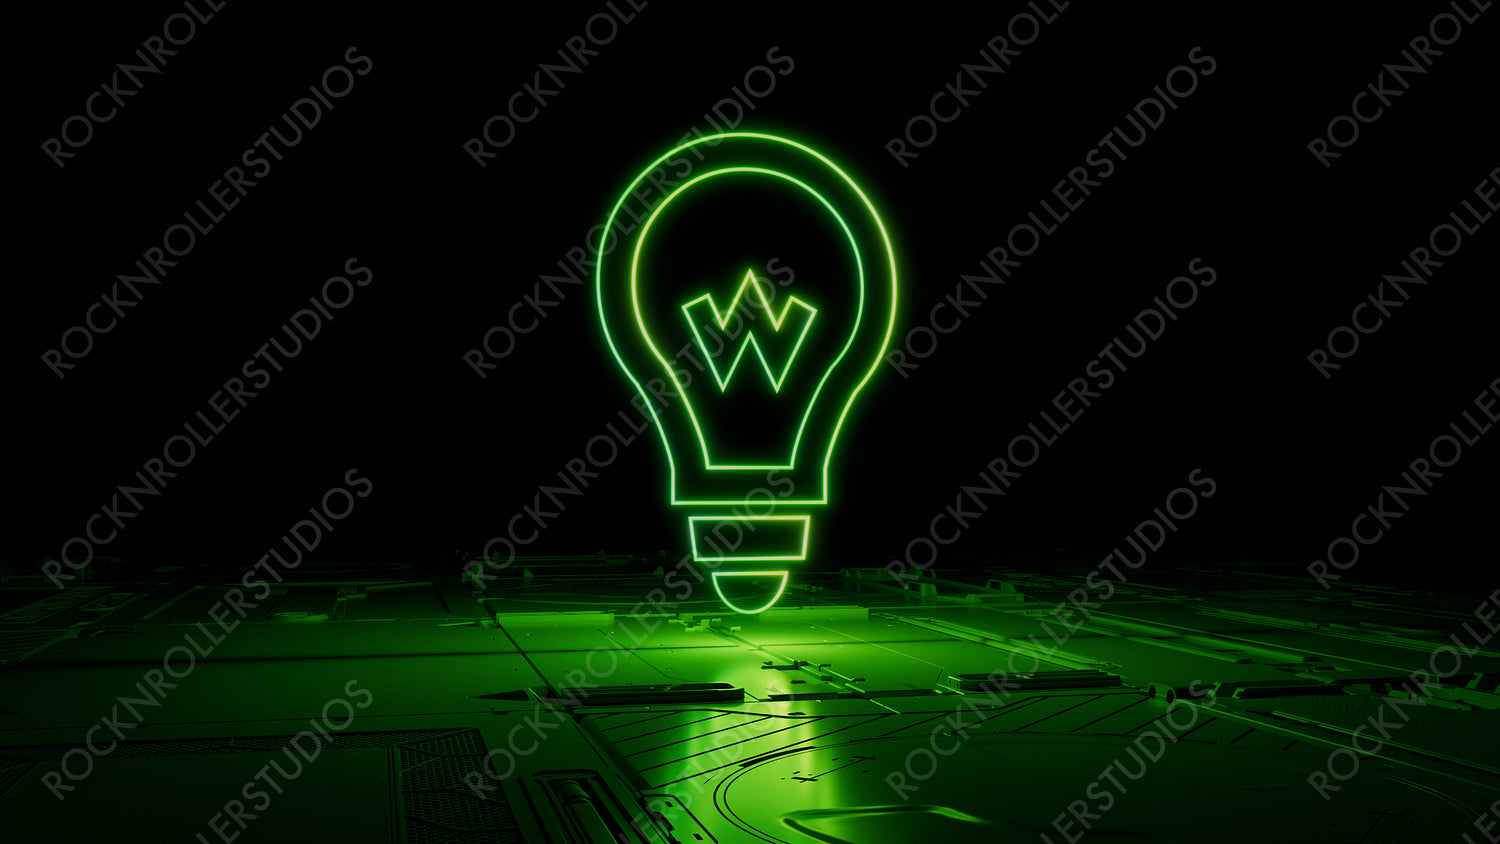 Green neon light lightbulb icon. Vibrant colored Innovation technology symbol, on a black background with high tech floor. 3D Render